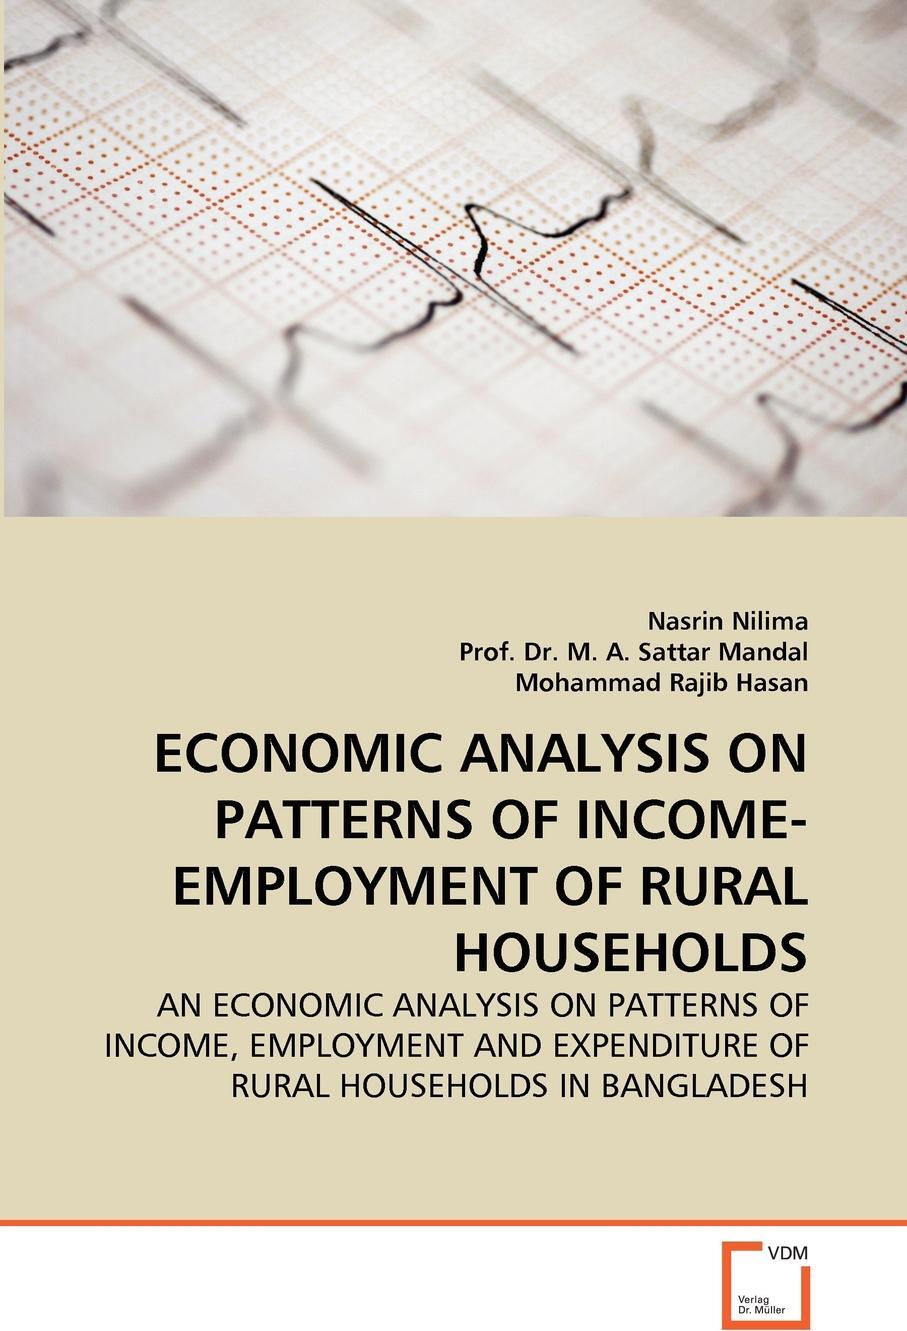 фото ECONOMIC ANALYSIS ON PATTERNS OF INCOME-EMPLOYMENT OF RURAL HOUSEHOLDS